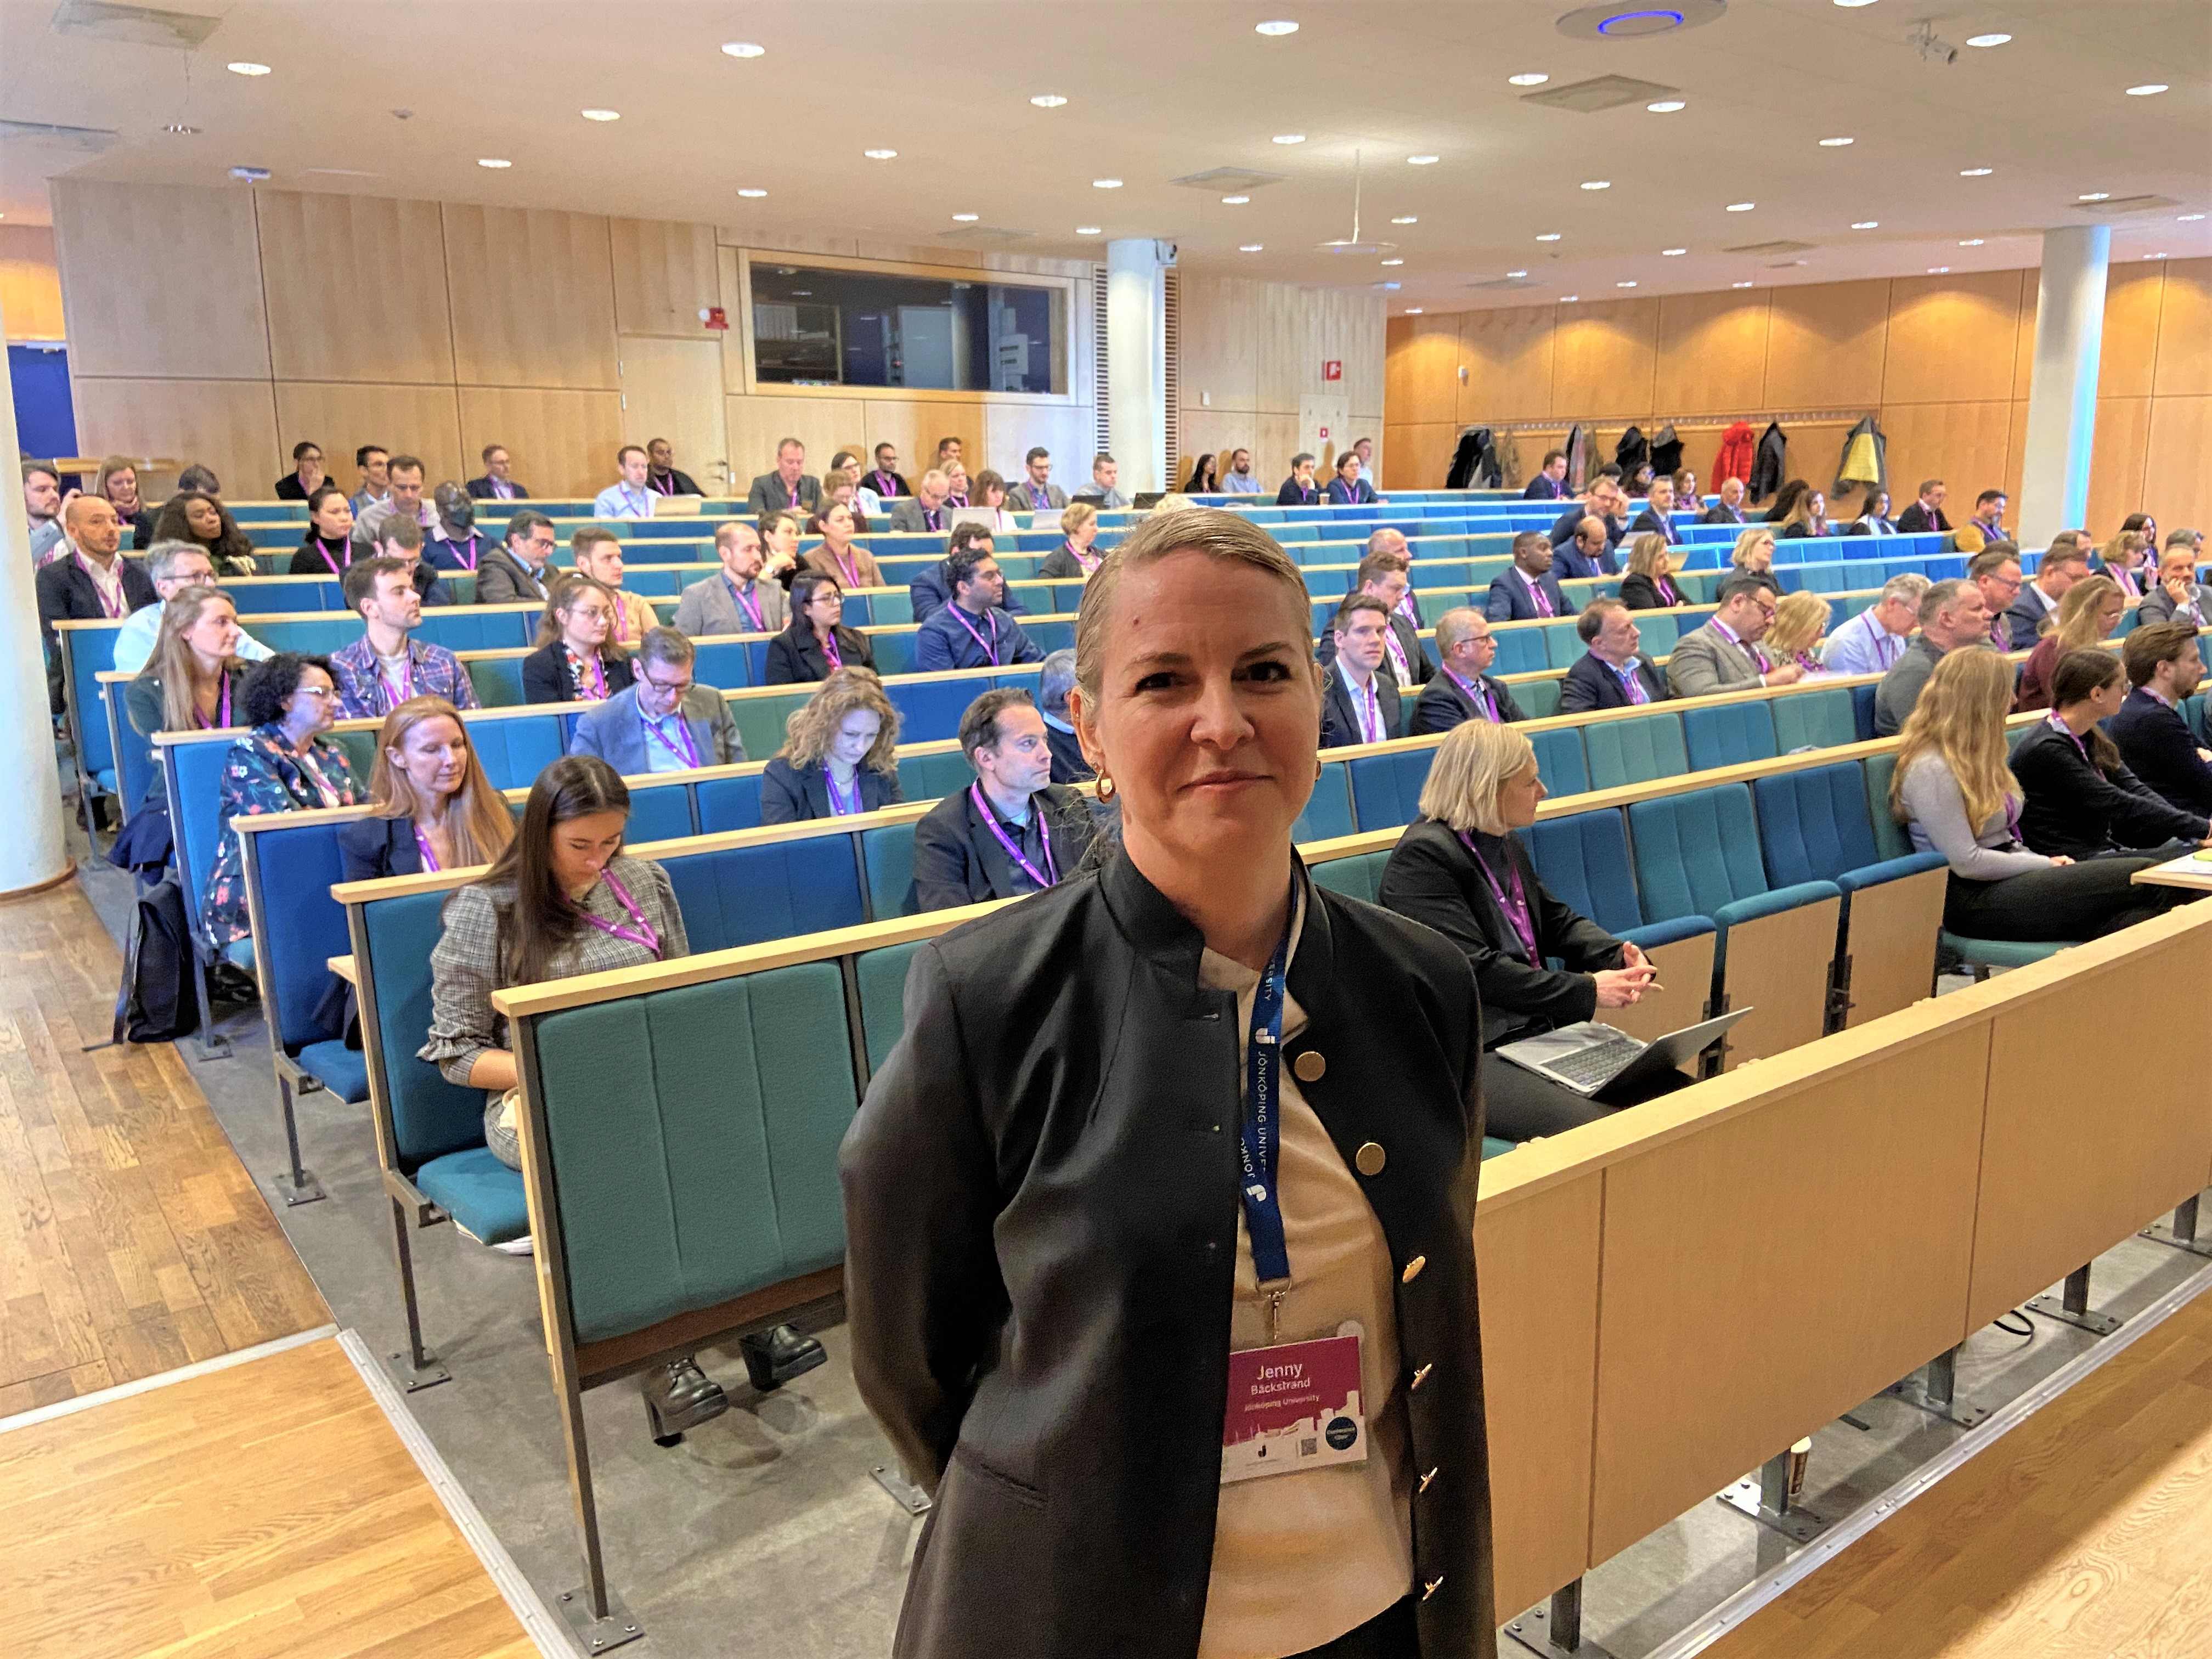 Jenny Bäckstrand,Associate Professor Operations and Supply Chain Management at the School of Engineering, hosted the IPSERA conference at Jönköping University.